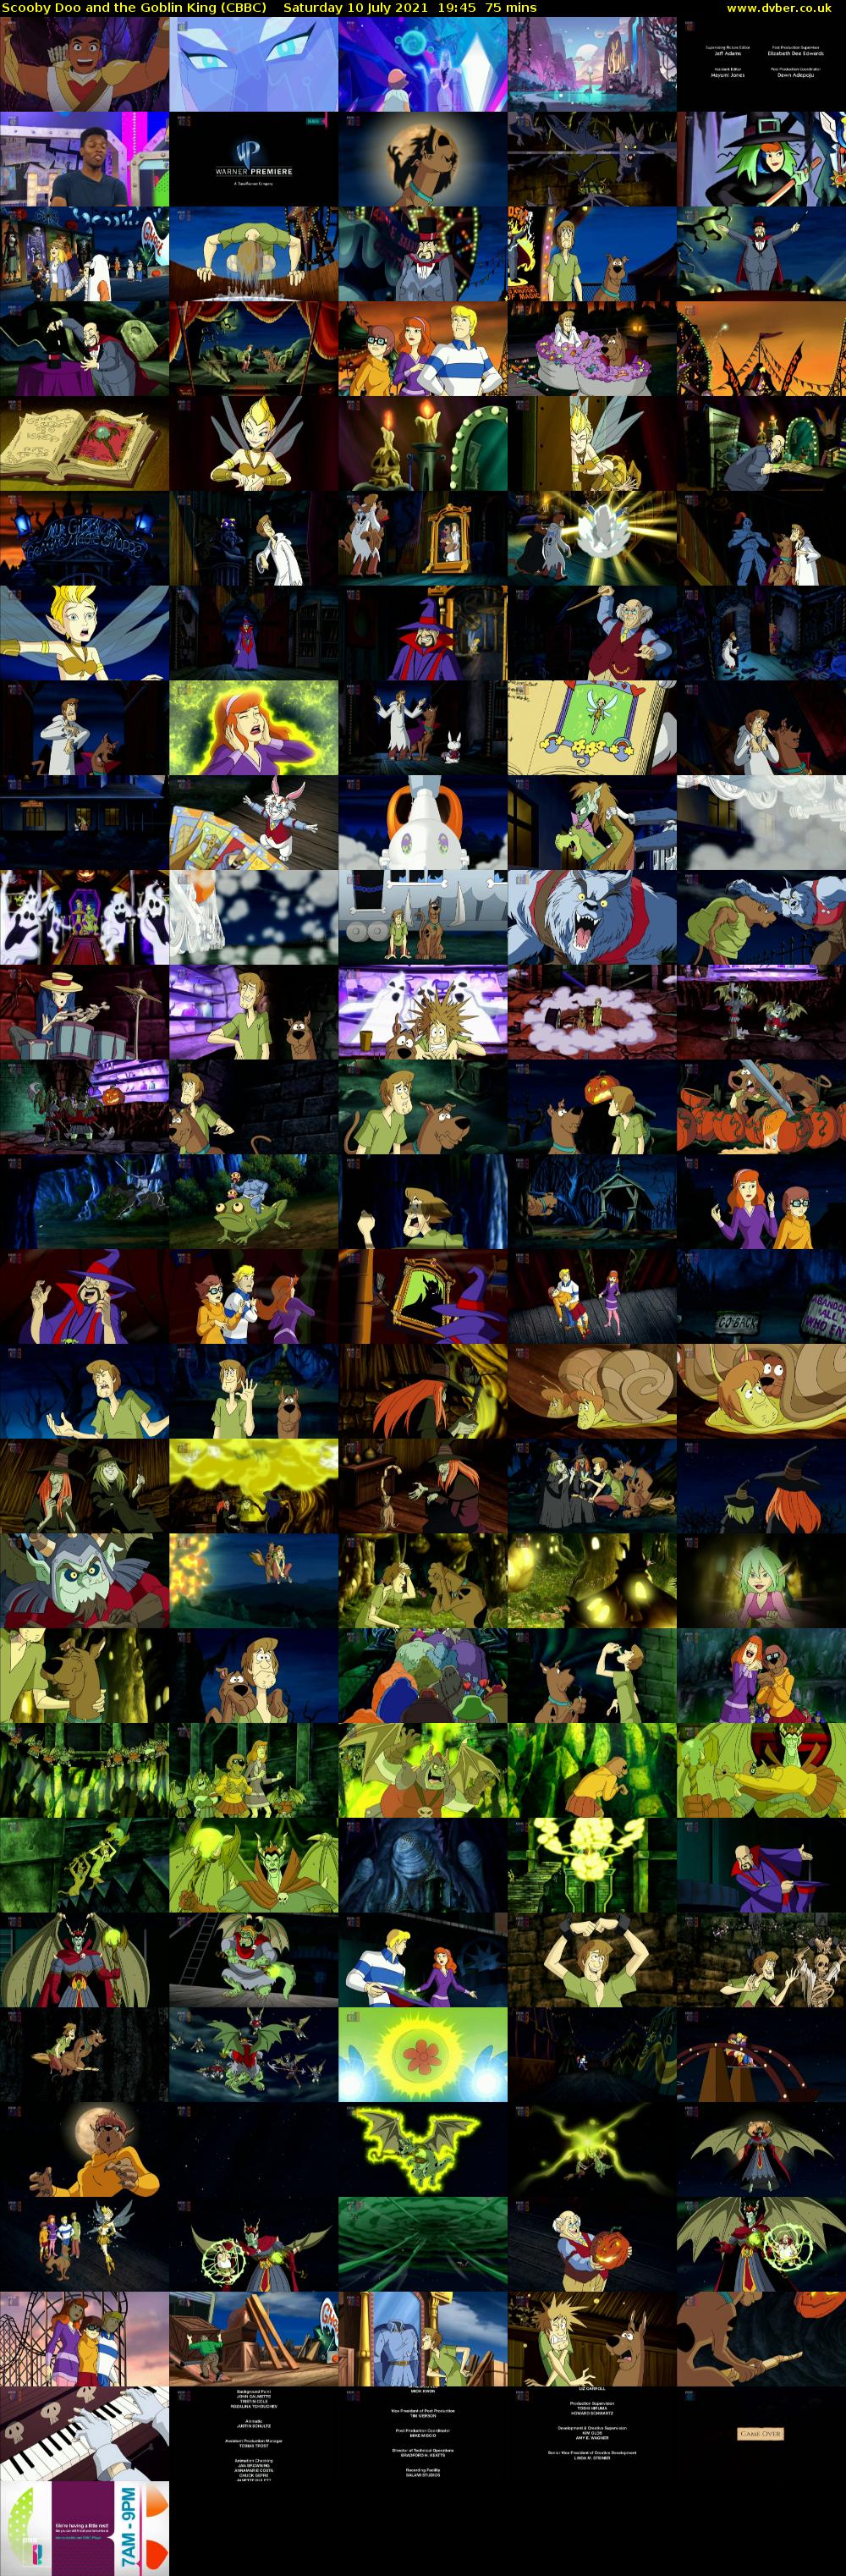 Scooby Doo and the Goblin King (CBBC) Saturday 10 July 2021 19:45 - 21:00